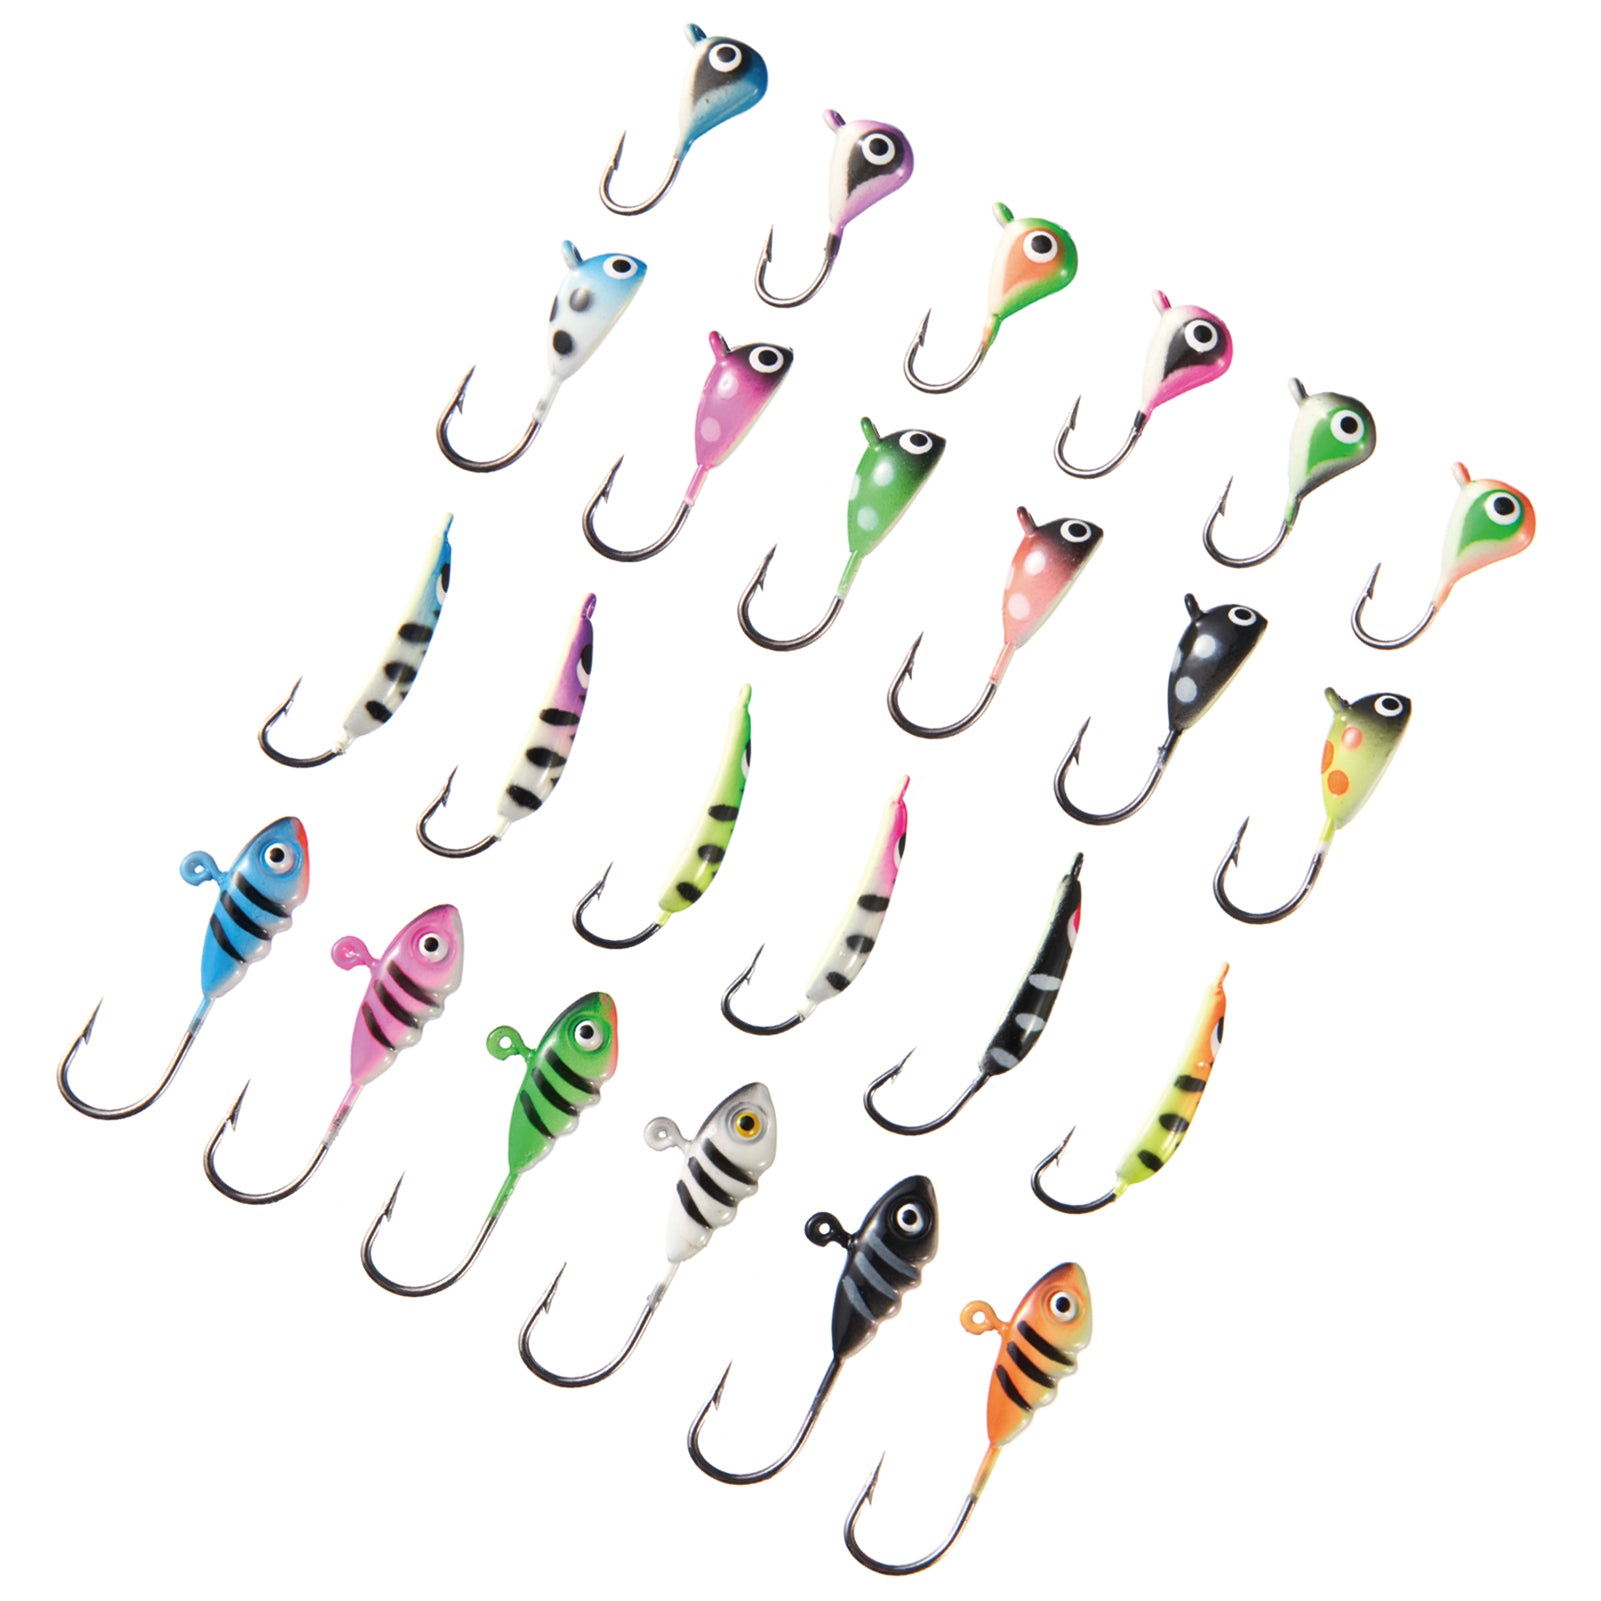 24Pcs/Box Crappie Jig Fishing Lures Kit Feather Jig Head Hook Fly Fishing  Lures for Perch Panfish Sunfish Bluegill Trout Walleye - AliExpress